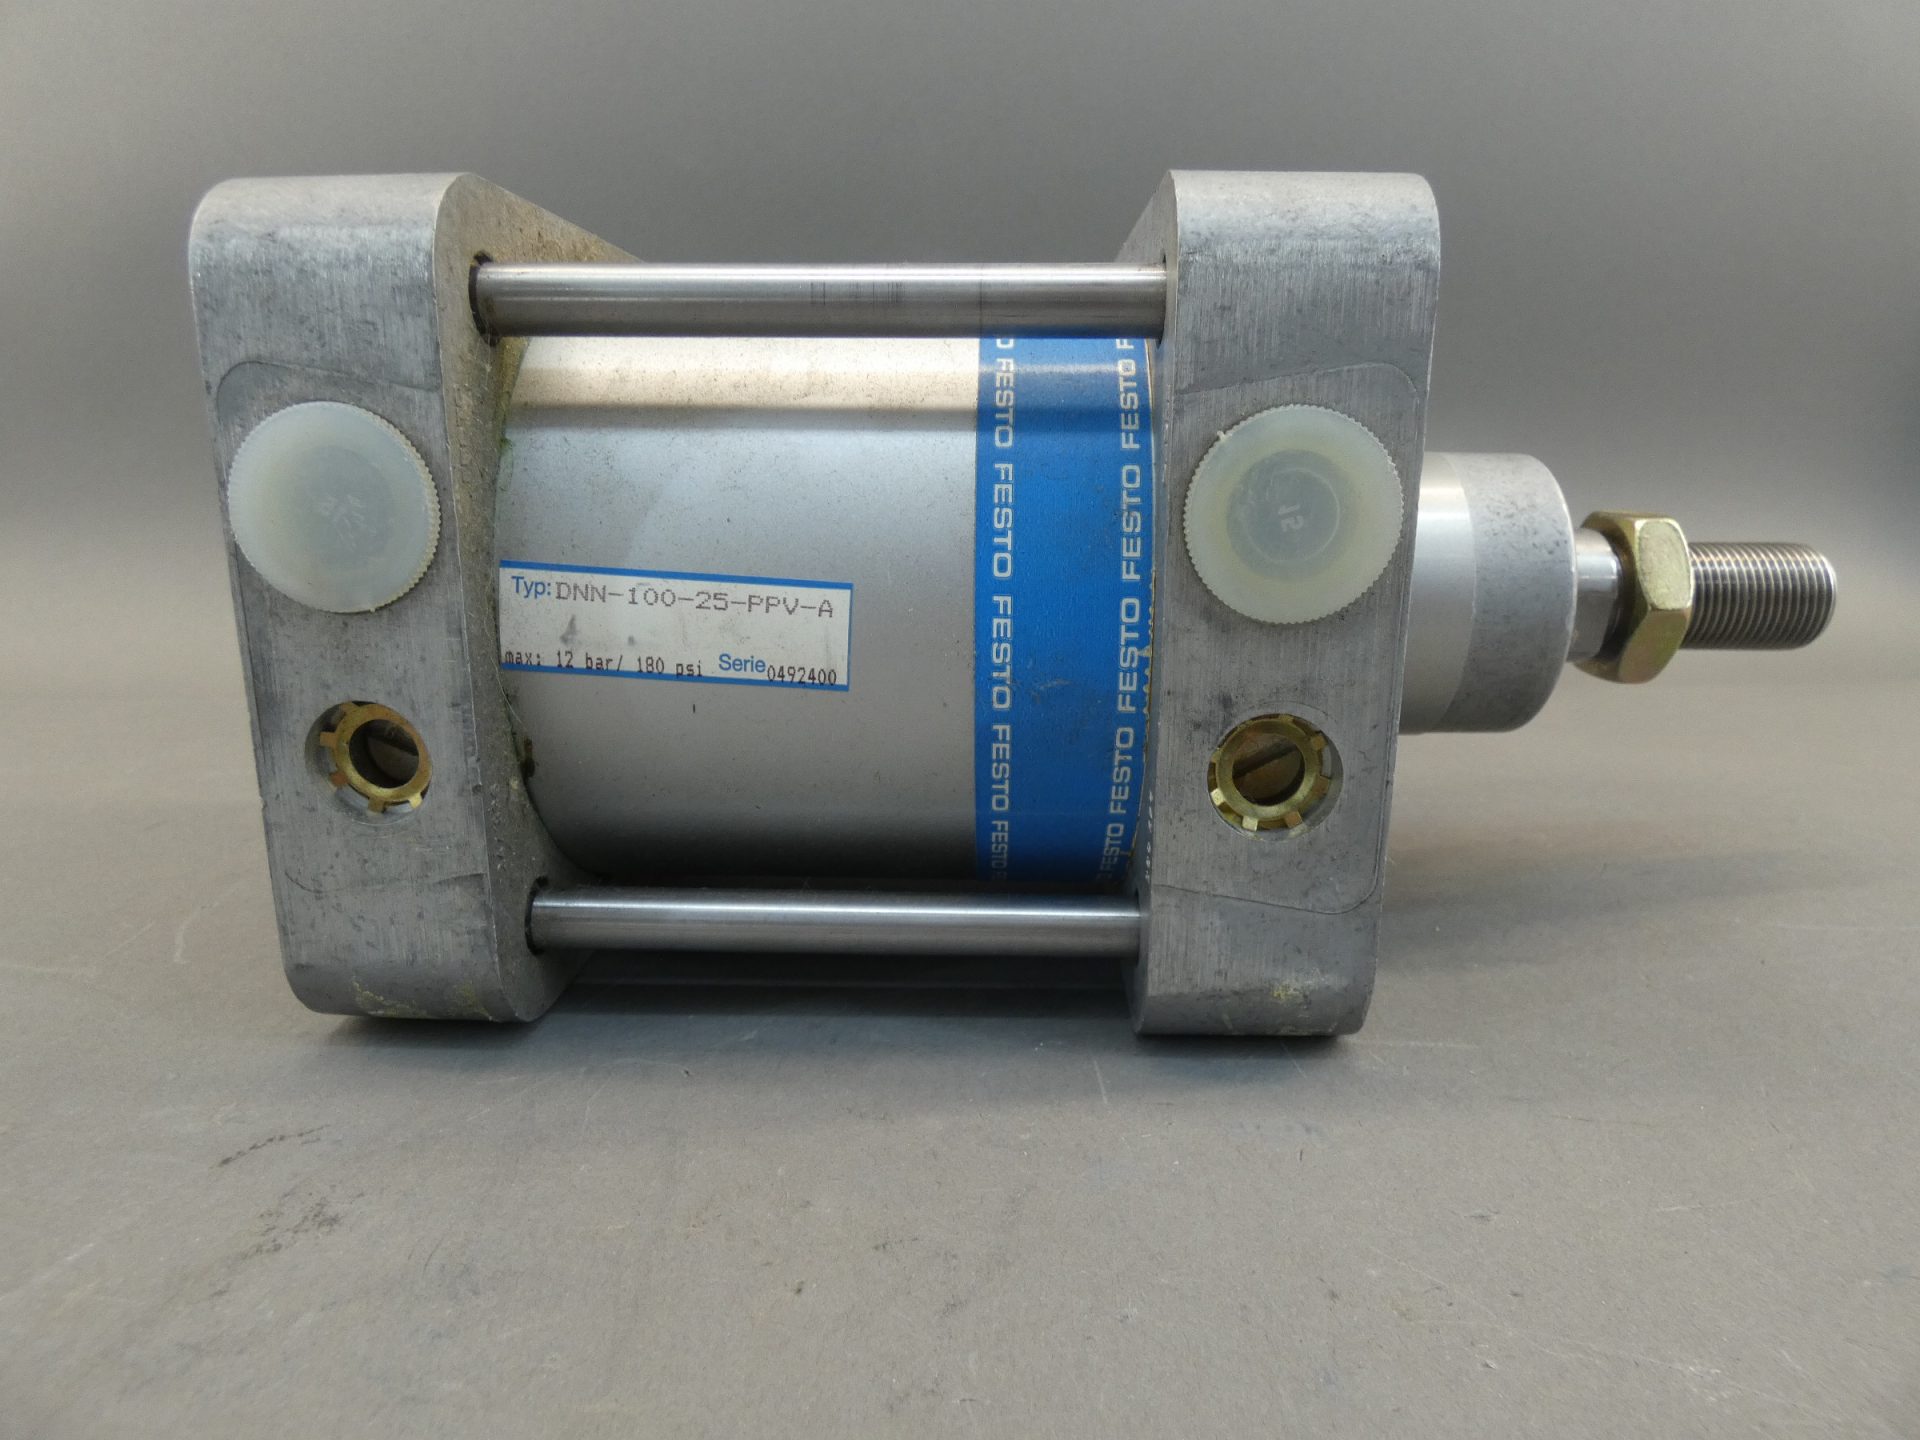 New FESTO DNG-50-25-PPV-A Cylinder 